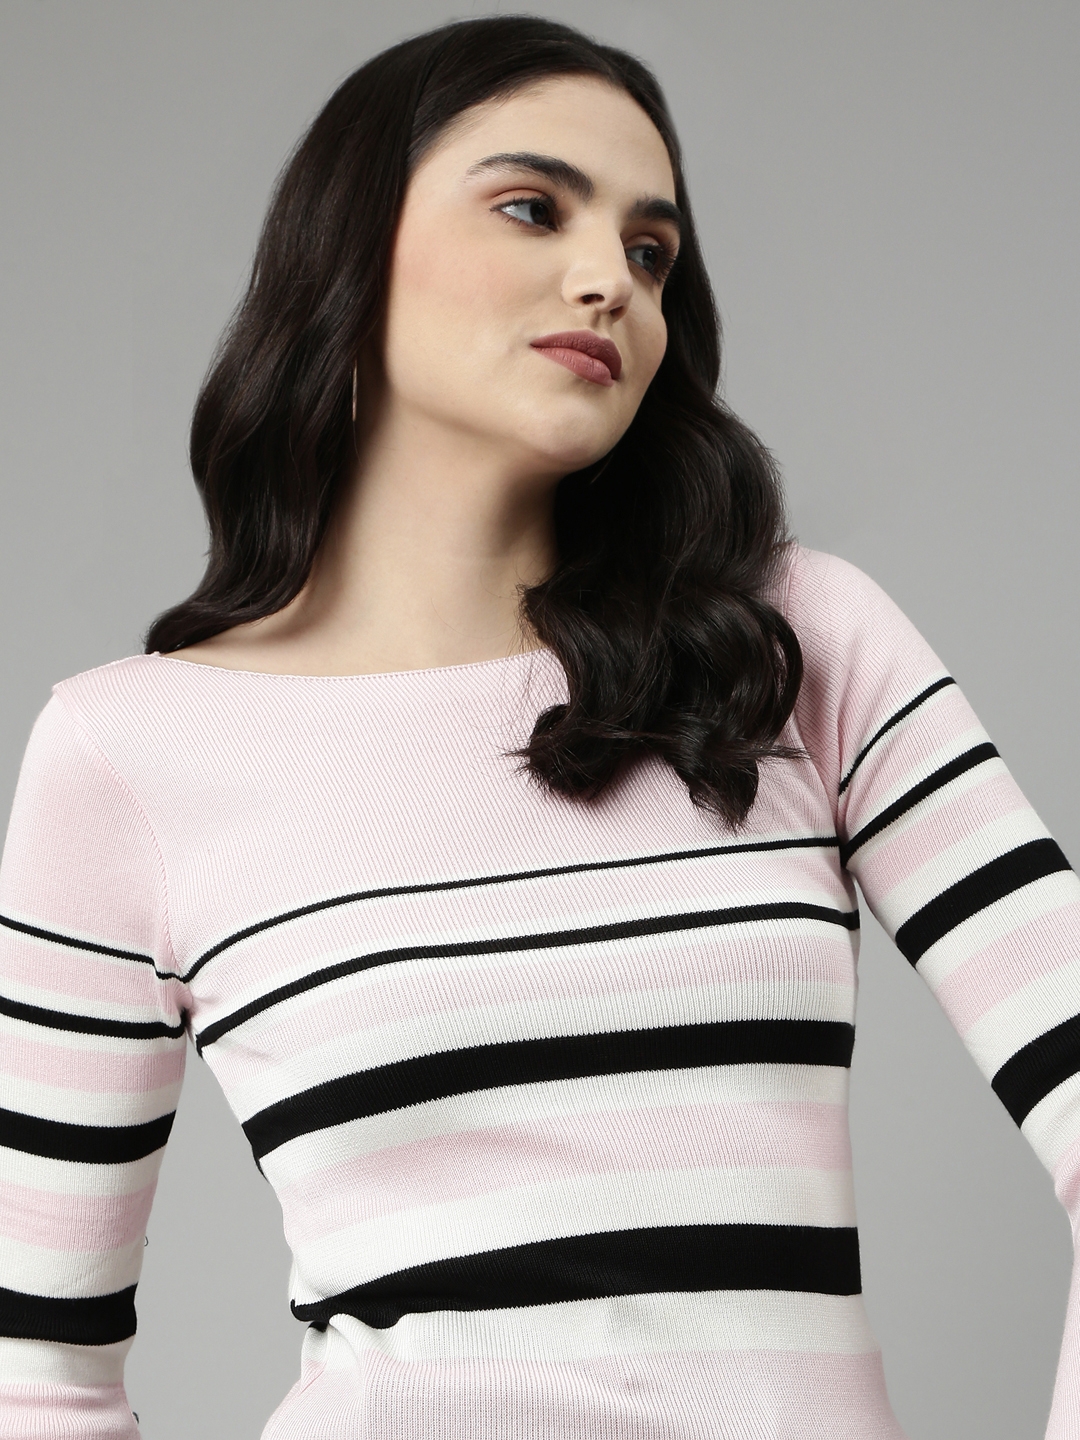 Showoff | SHOWOFF Women's Boat Neck Striped Bell Sleeves Fitted Pink Top 0